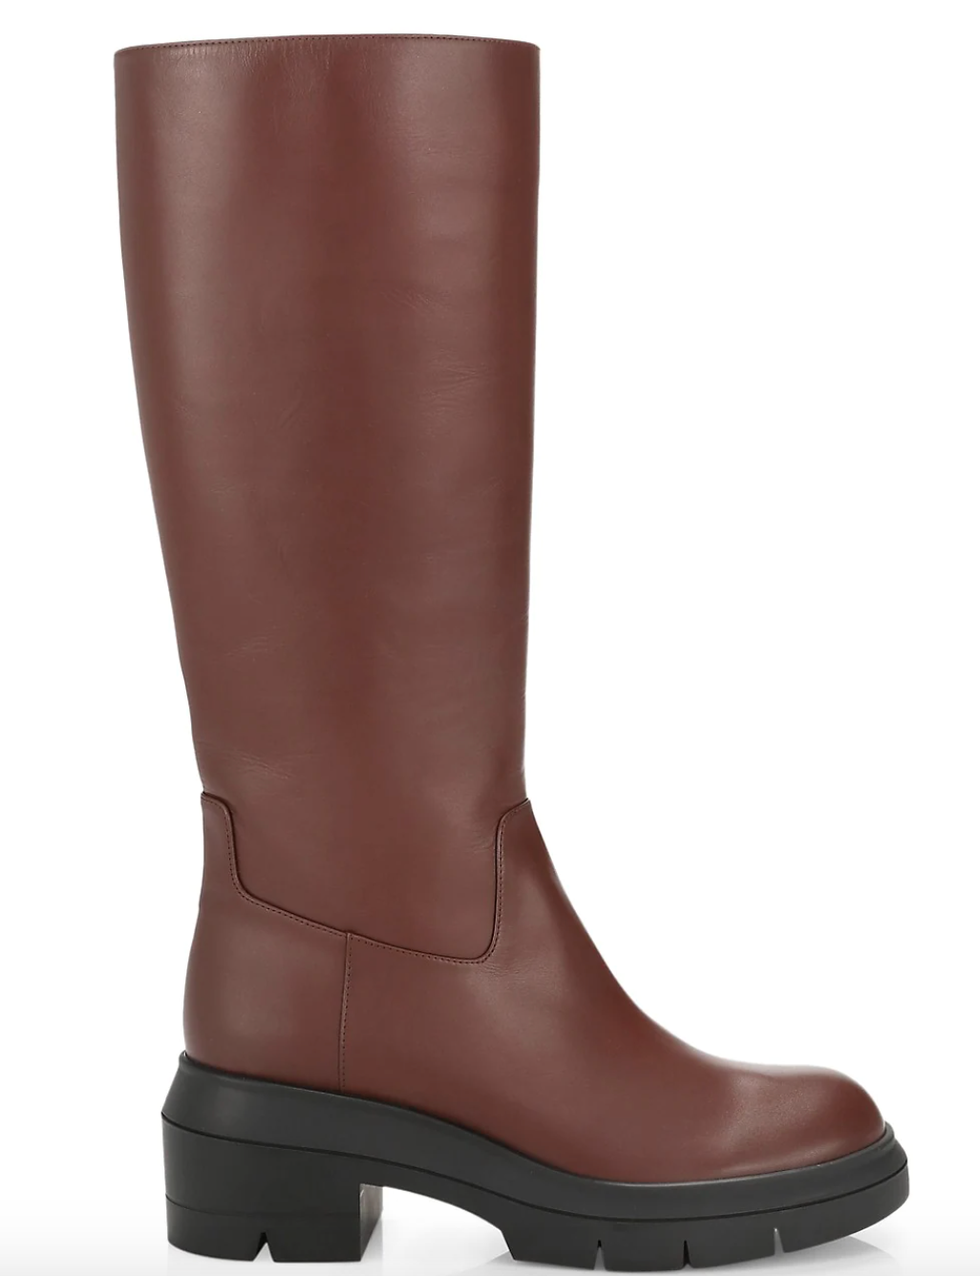 Norah Tall Leather Boots